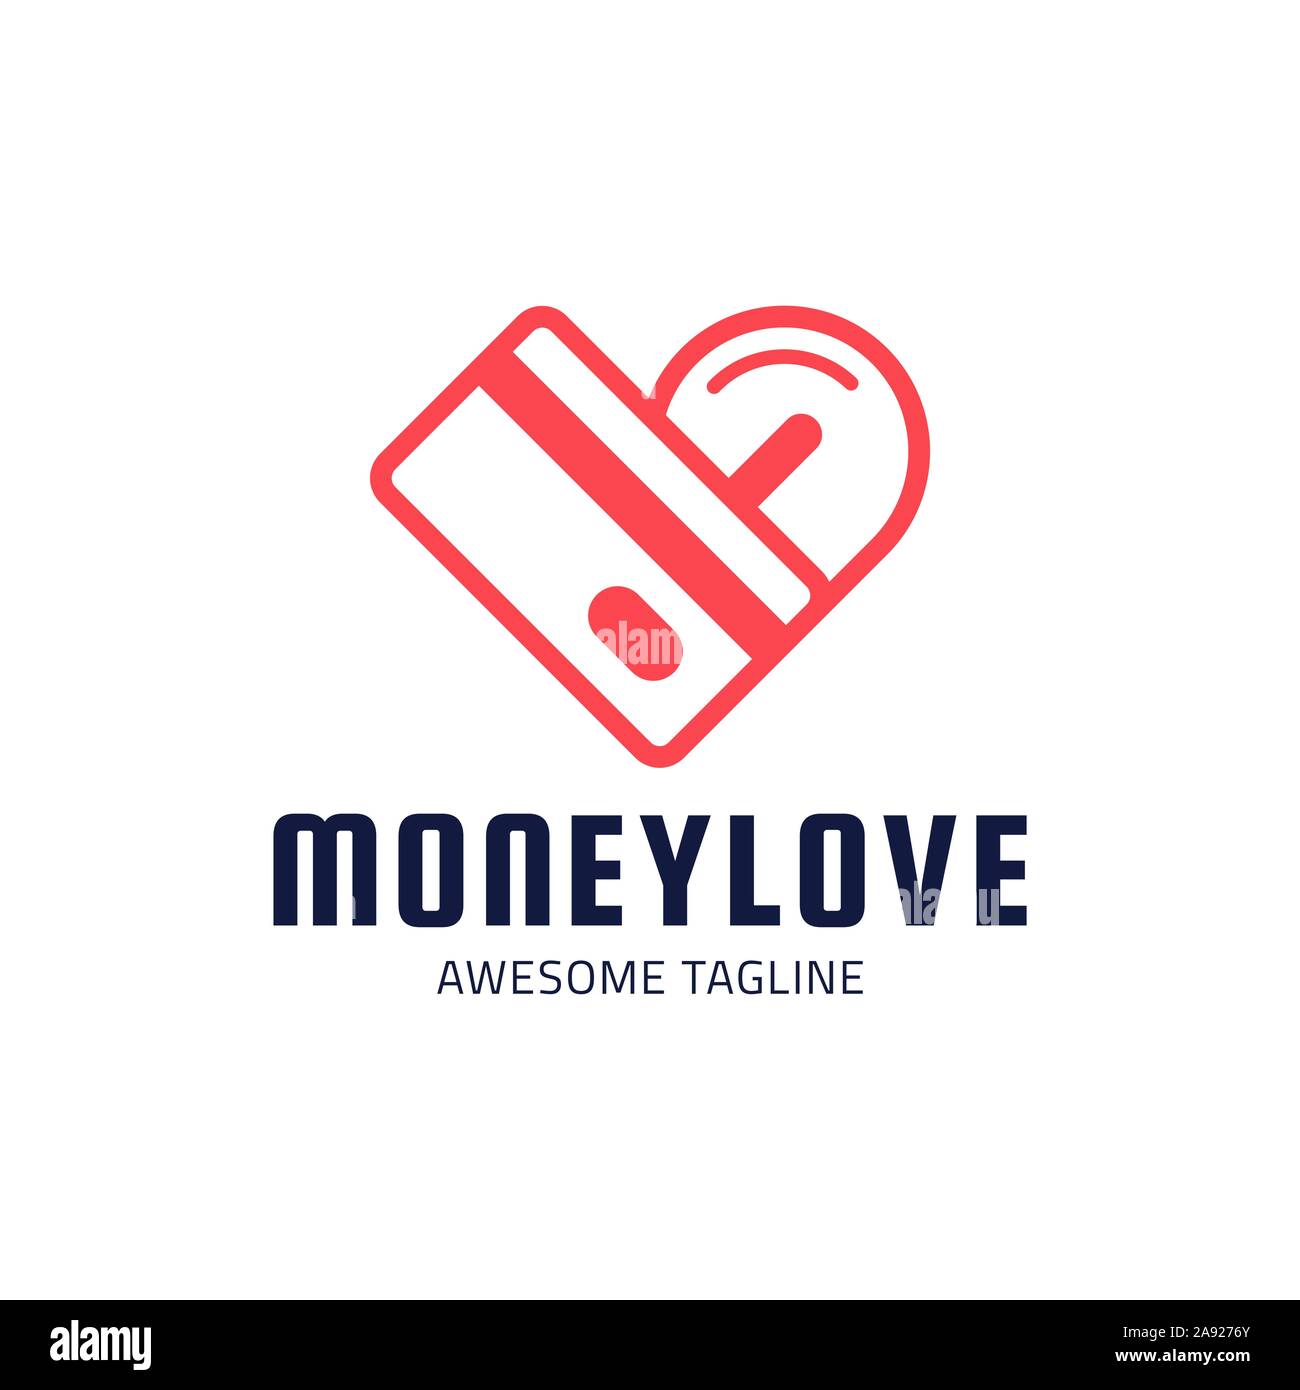 love money vector logo. heart shaped coin and credit card logo. Logotype with coins for business. Stock Vector